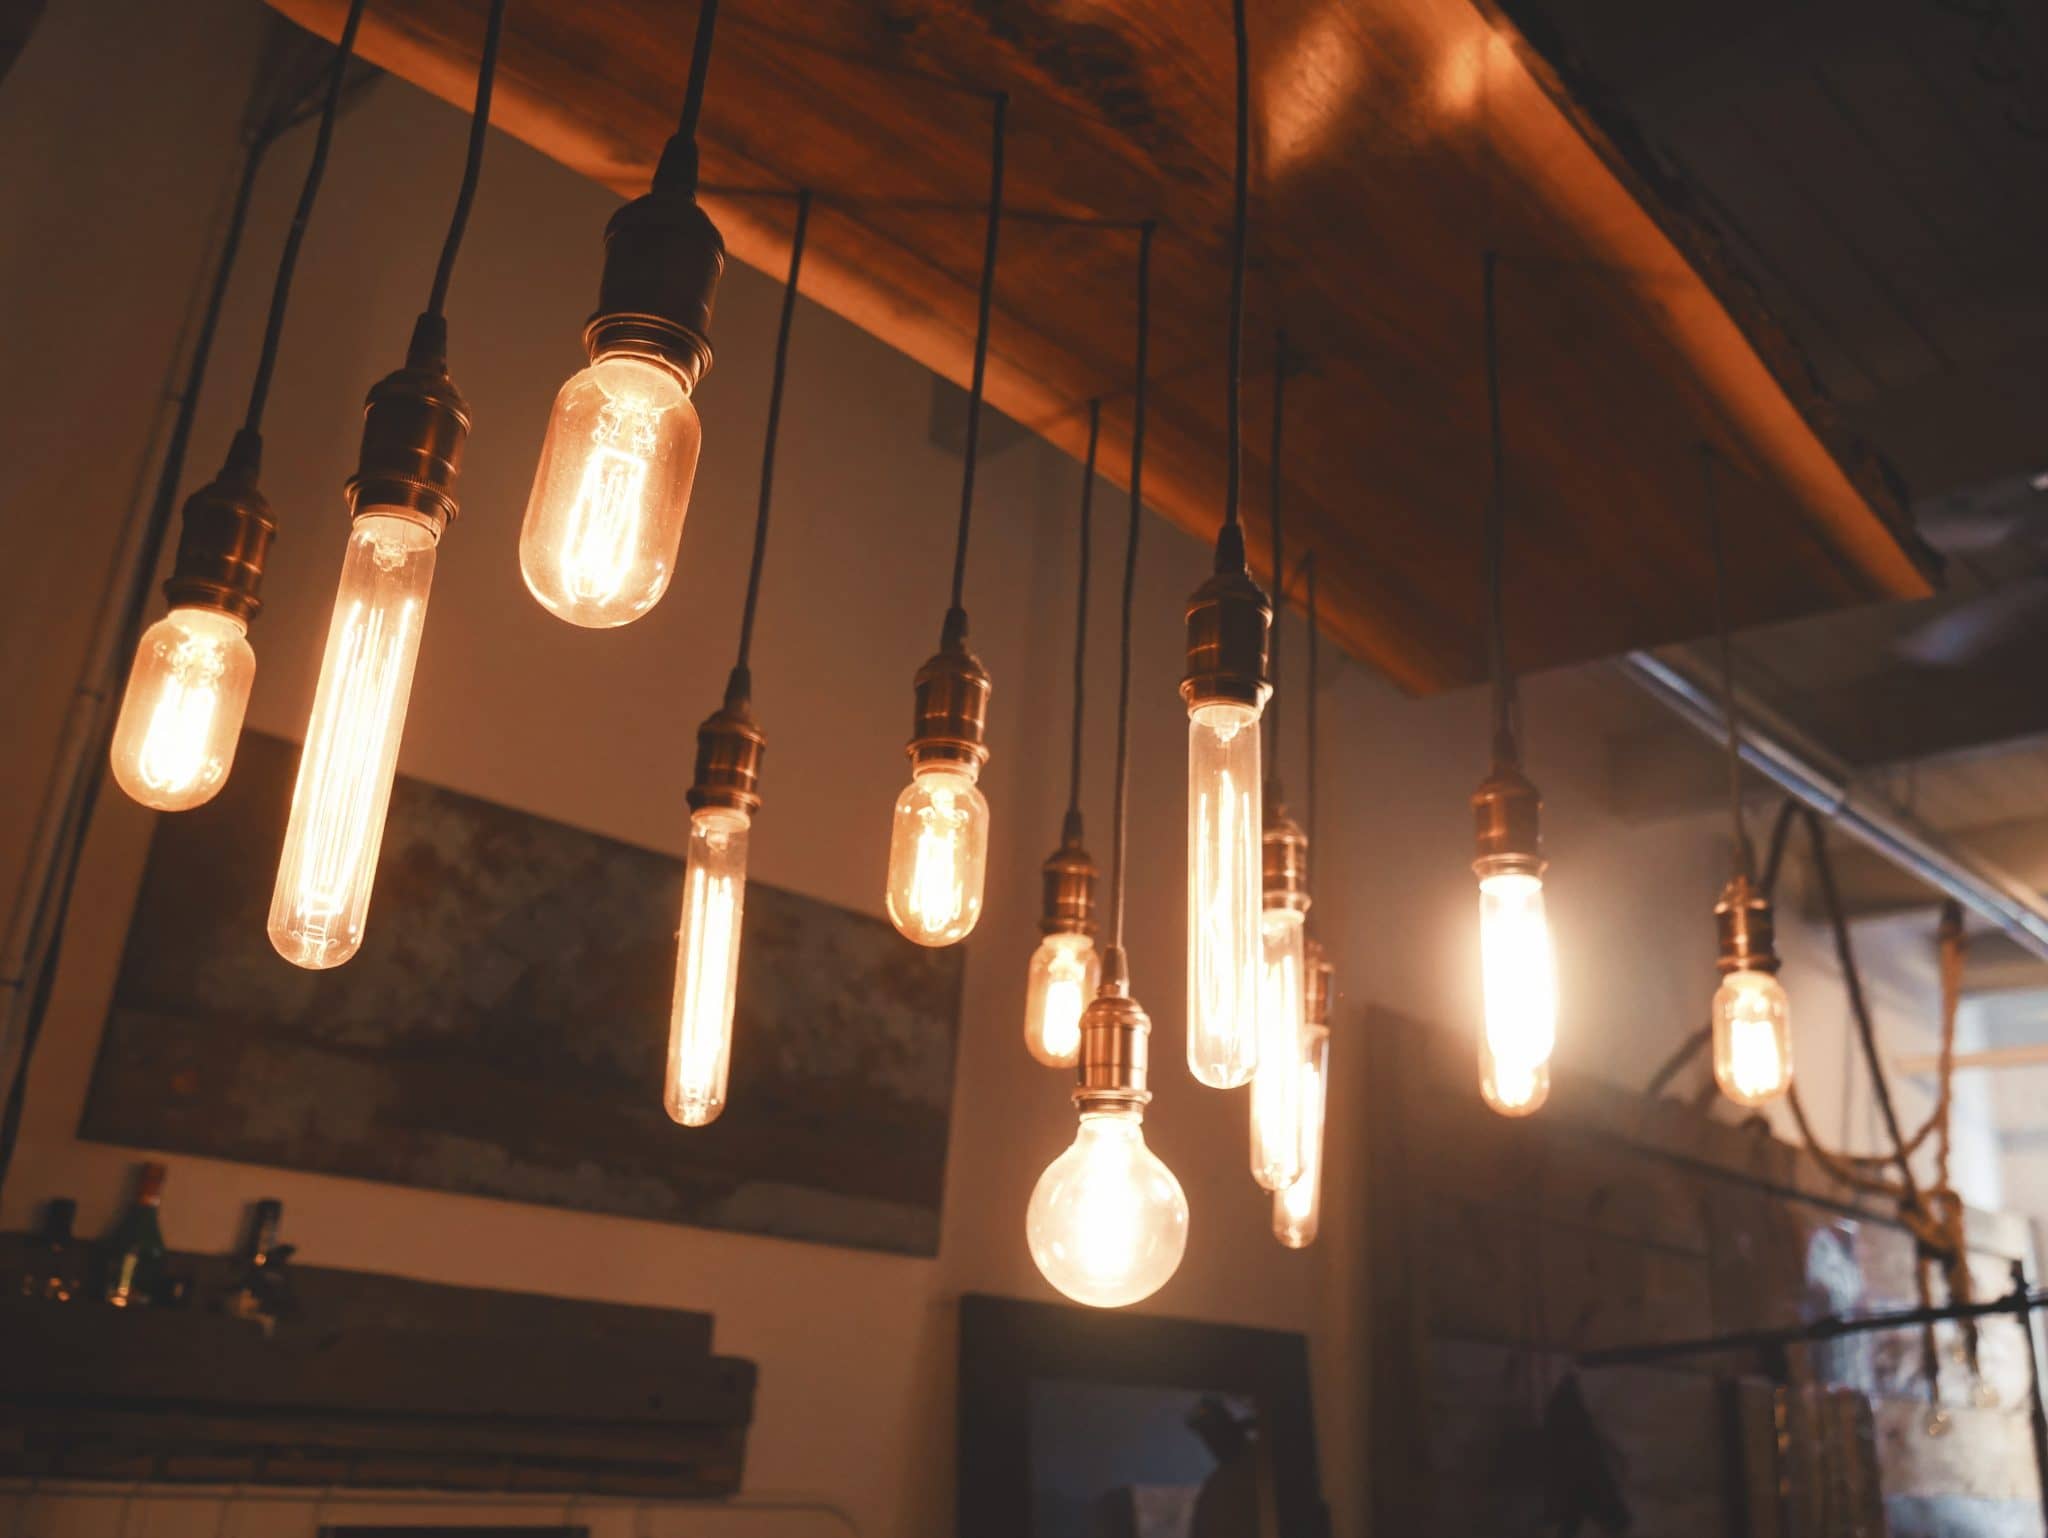 How to find a good lighting company